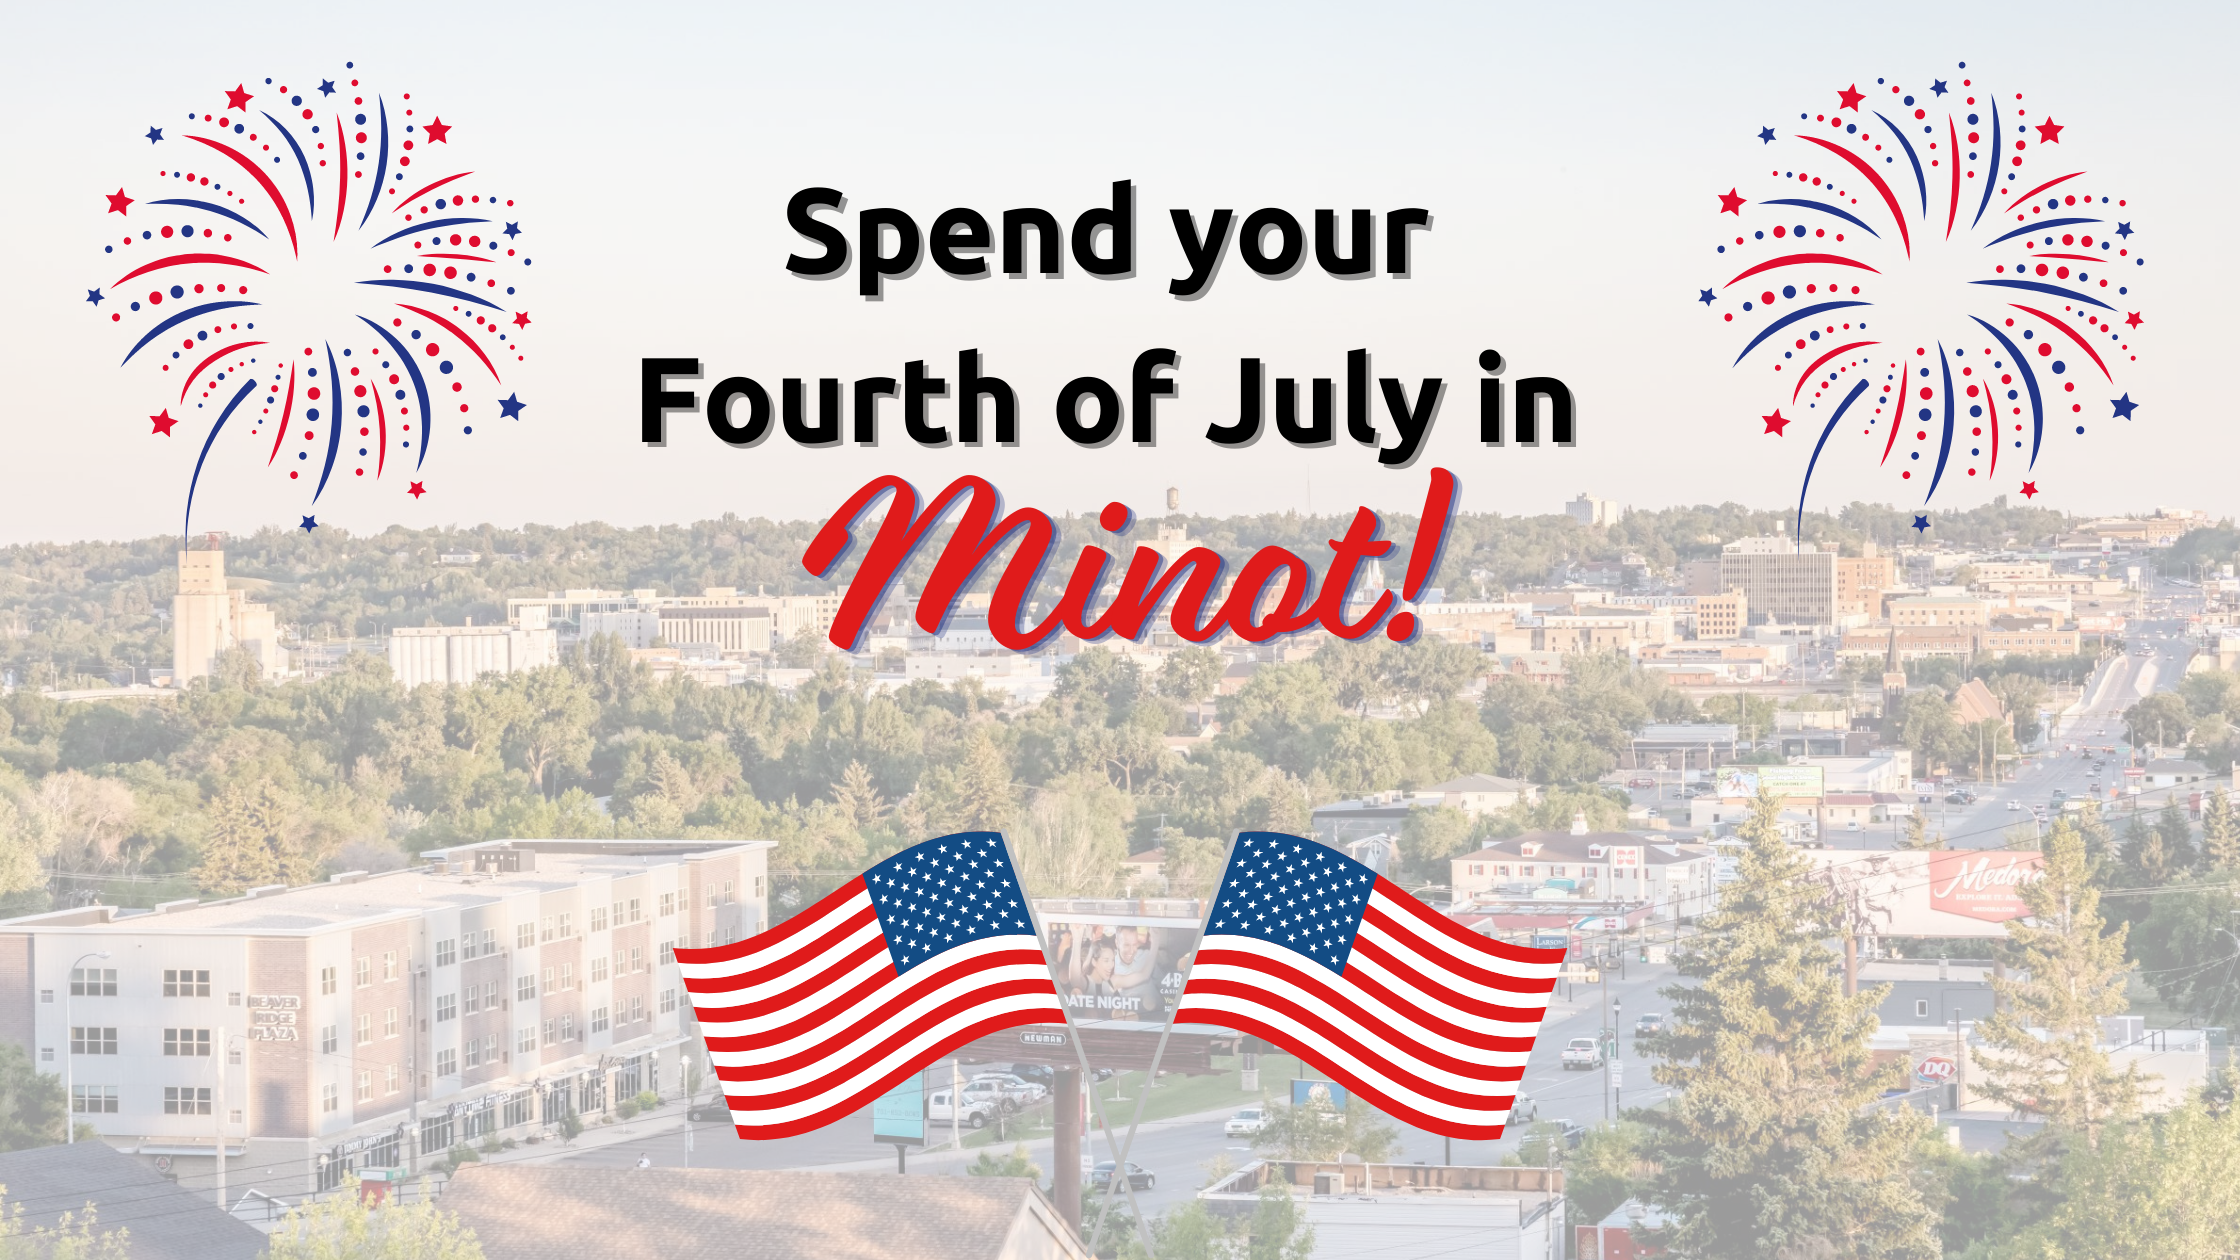 Spend your 4th of July in Minot!